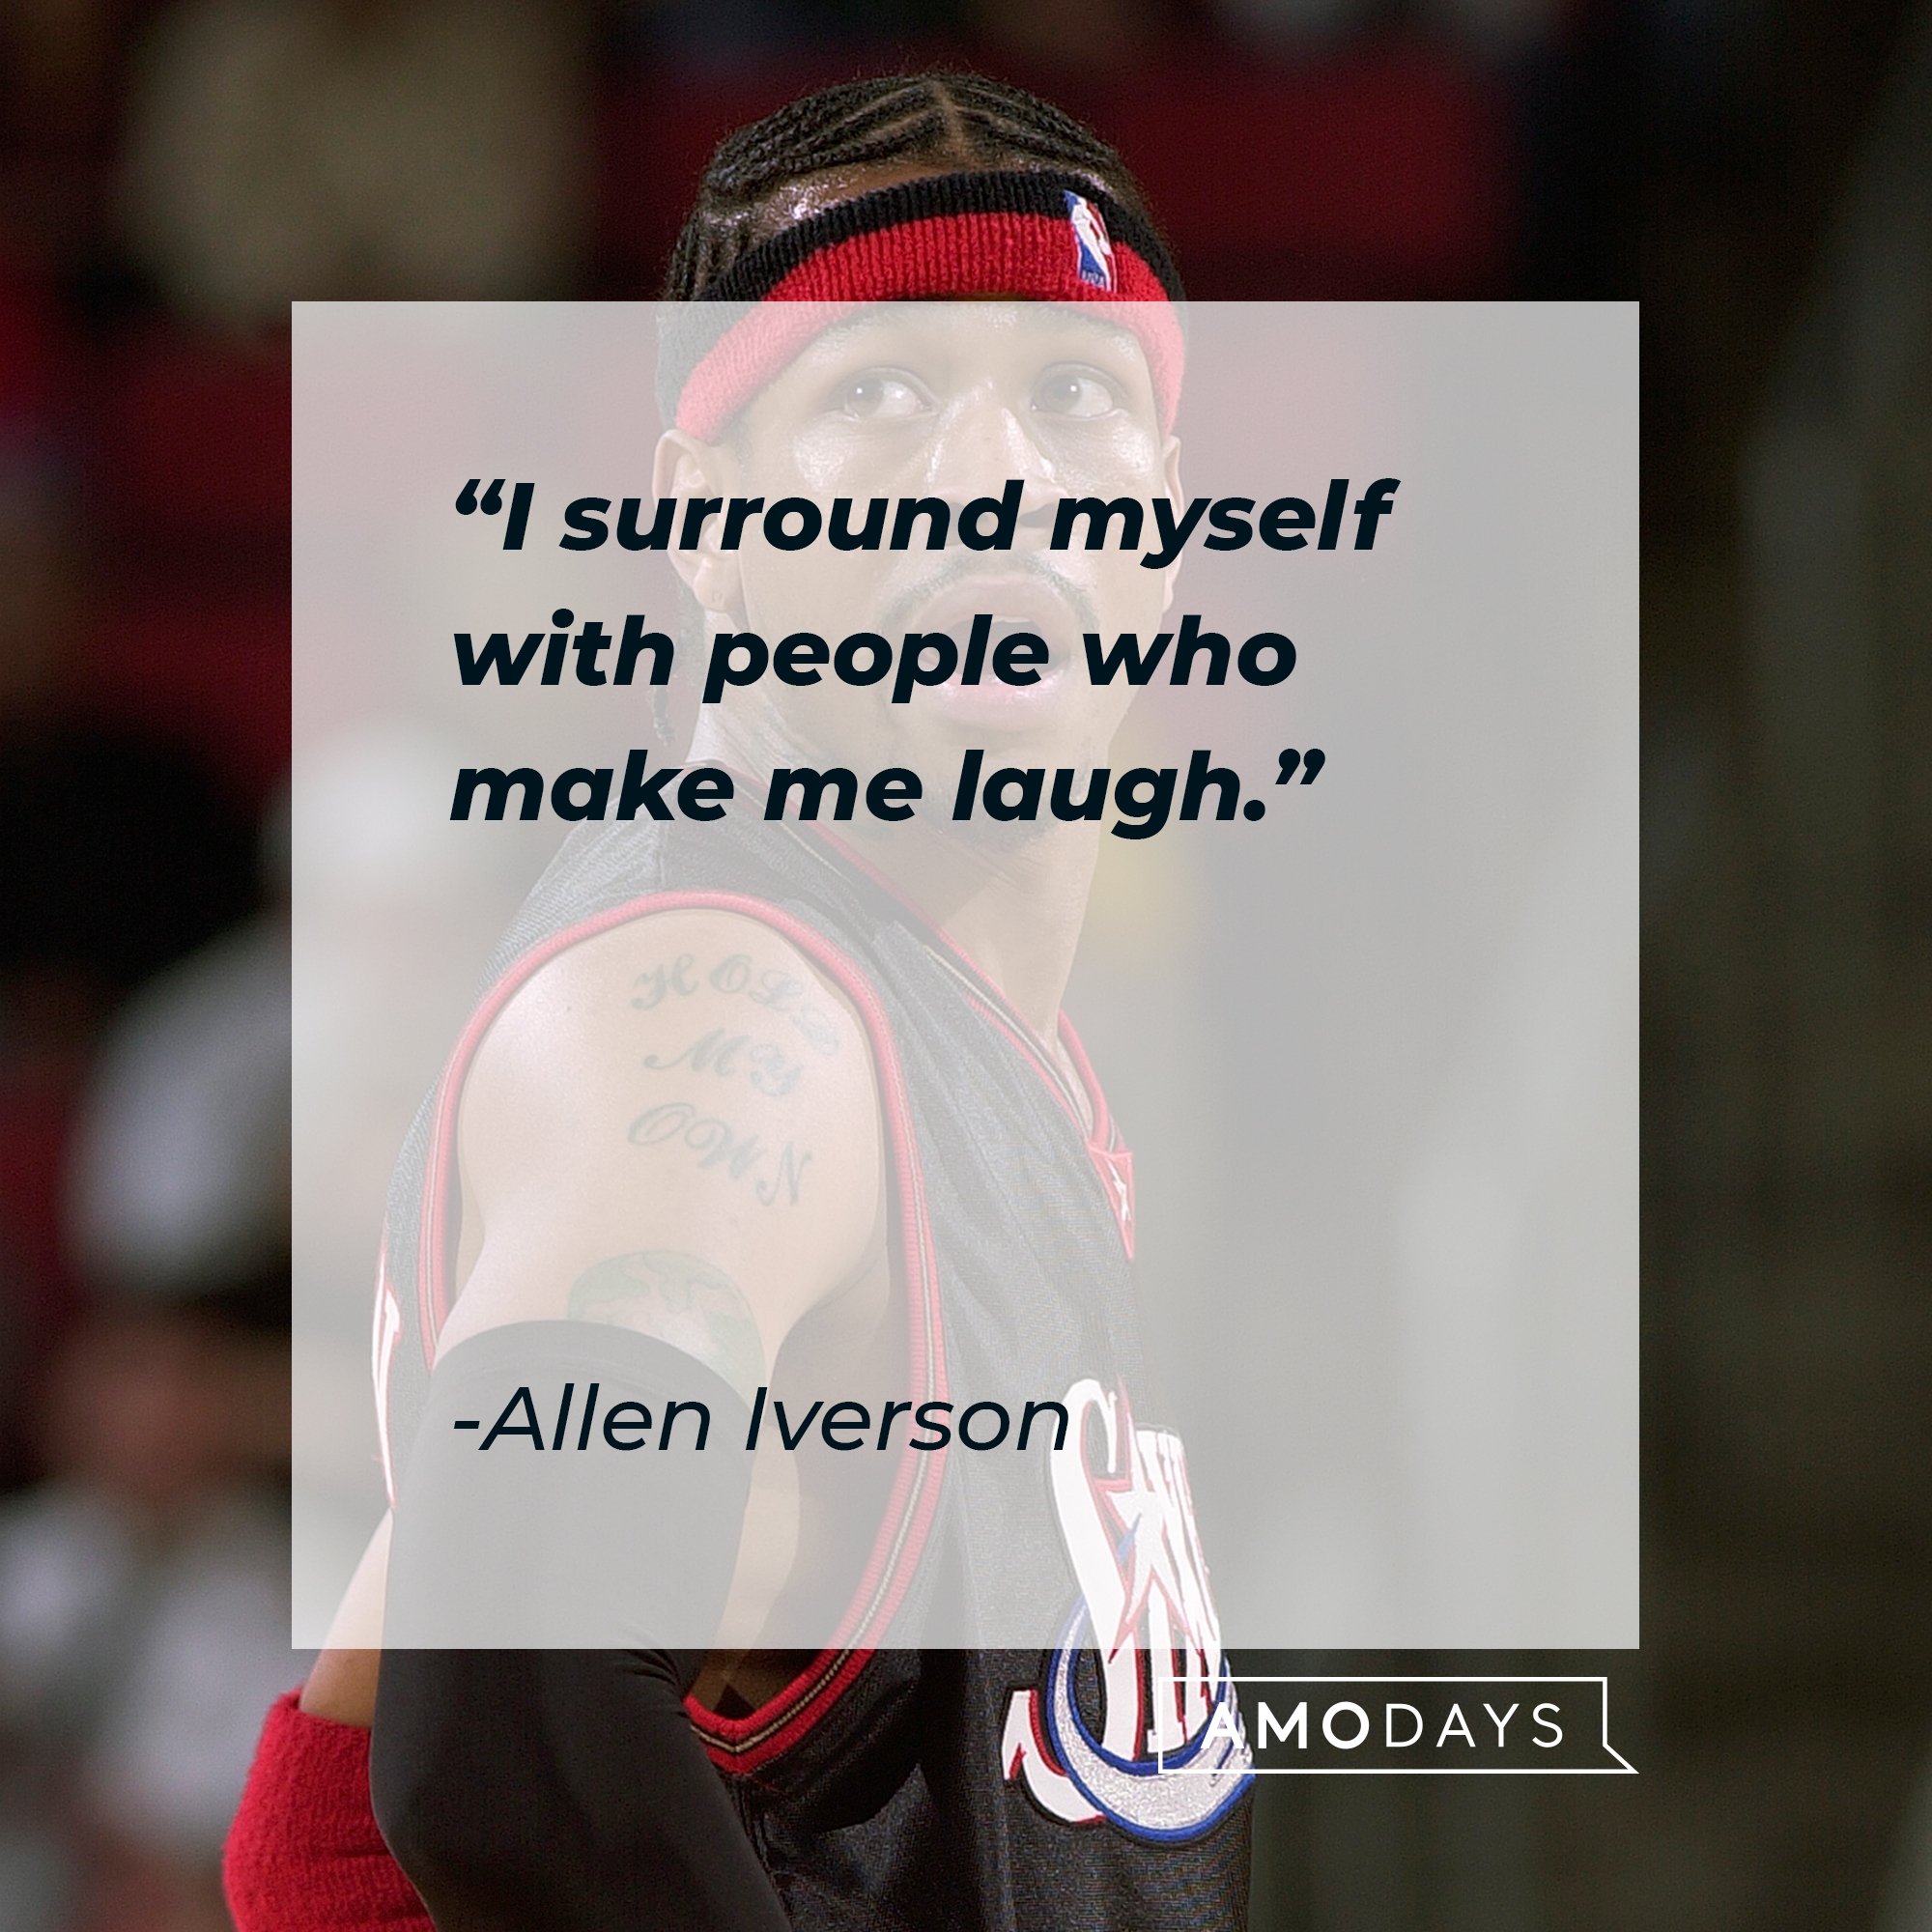 Allen Iverson's quote: "I surround myself with people who make me laugh." | Image: AmoDays